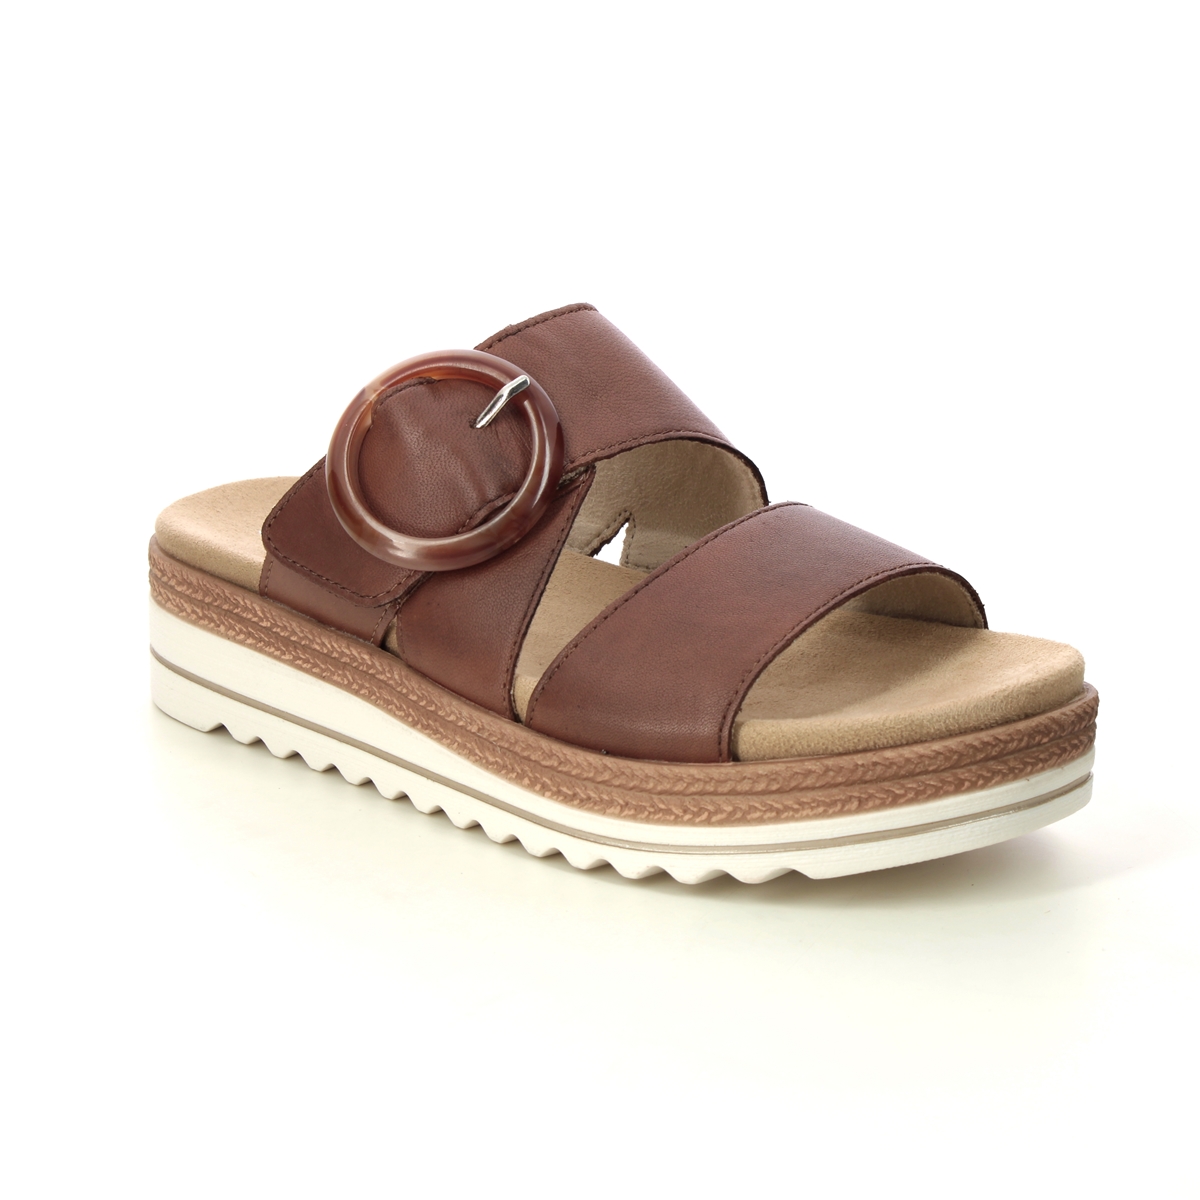 Remonte D0Q51-24 Bily Flat Slide Tan Leather Womens Slide Sandals in a Plain Leather in Size 41